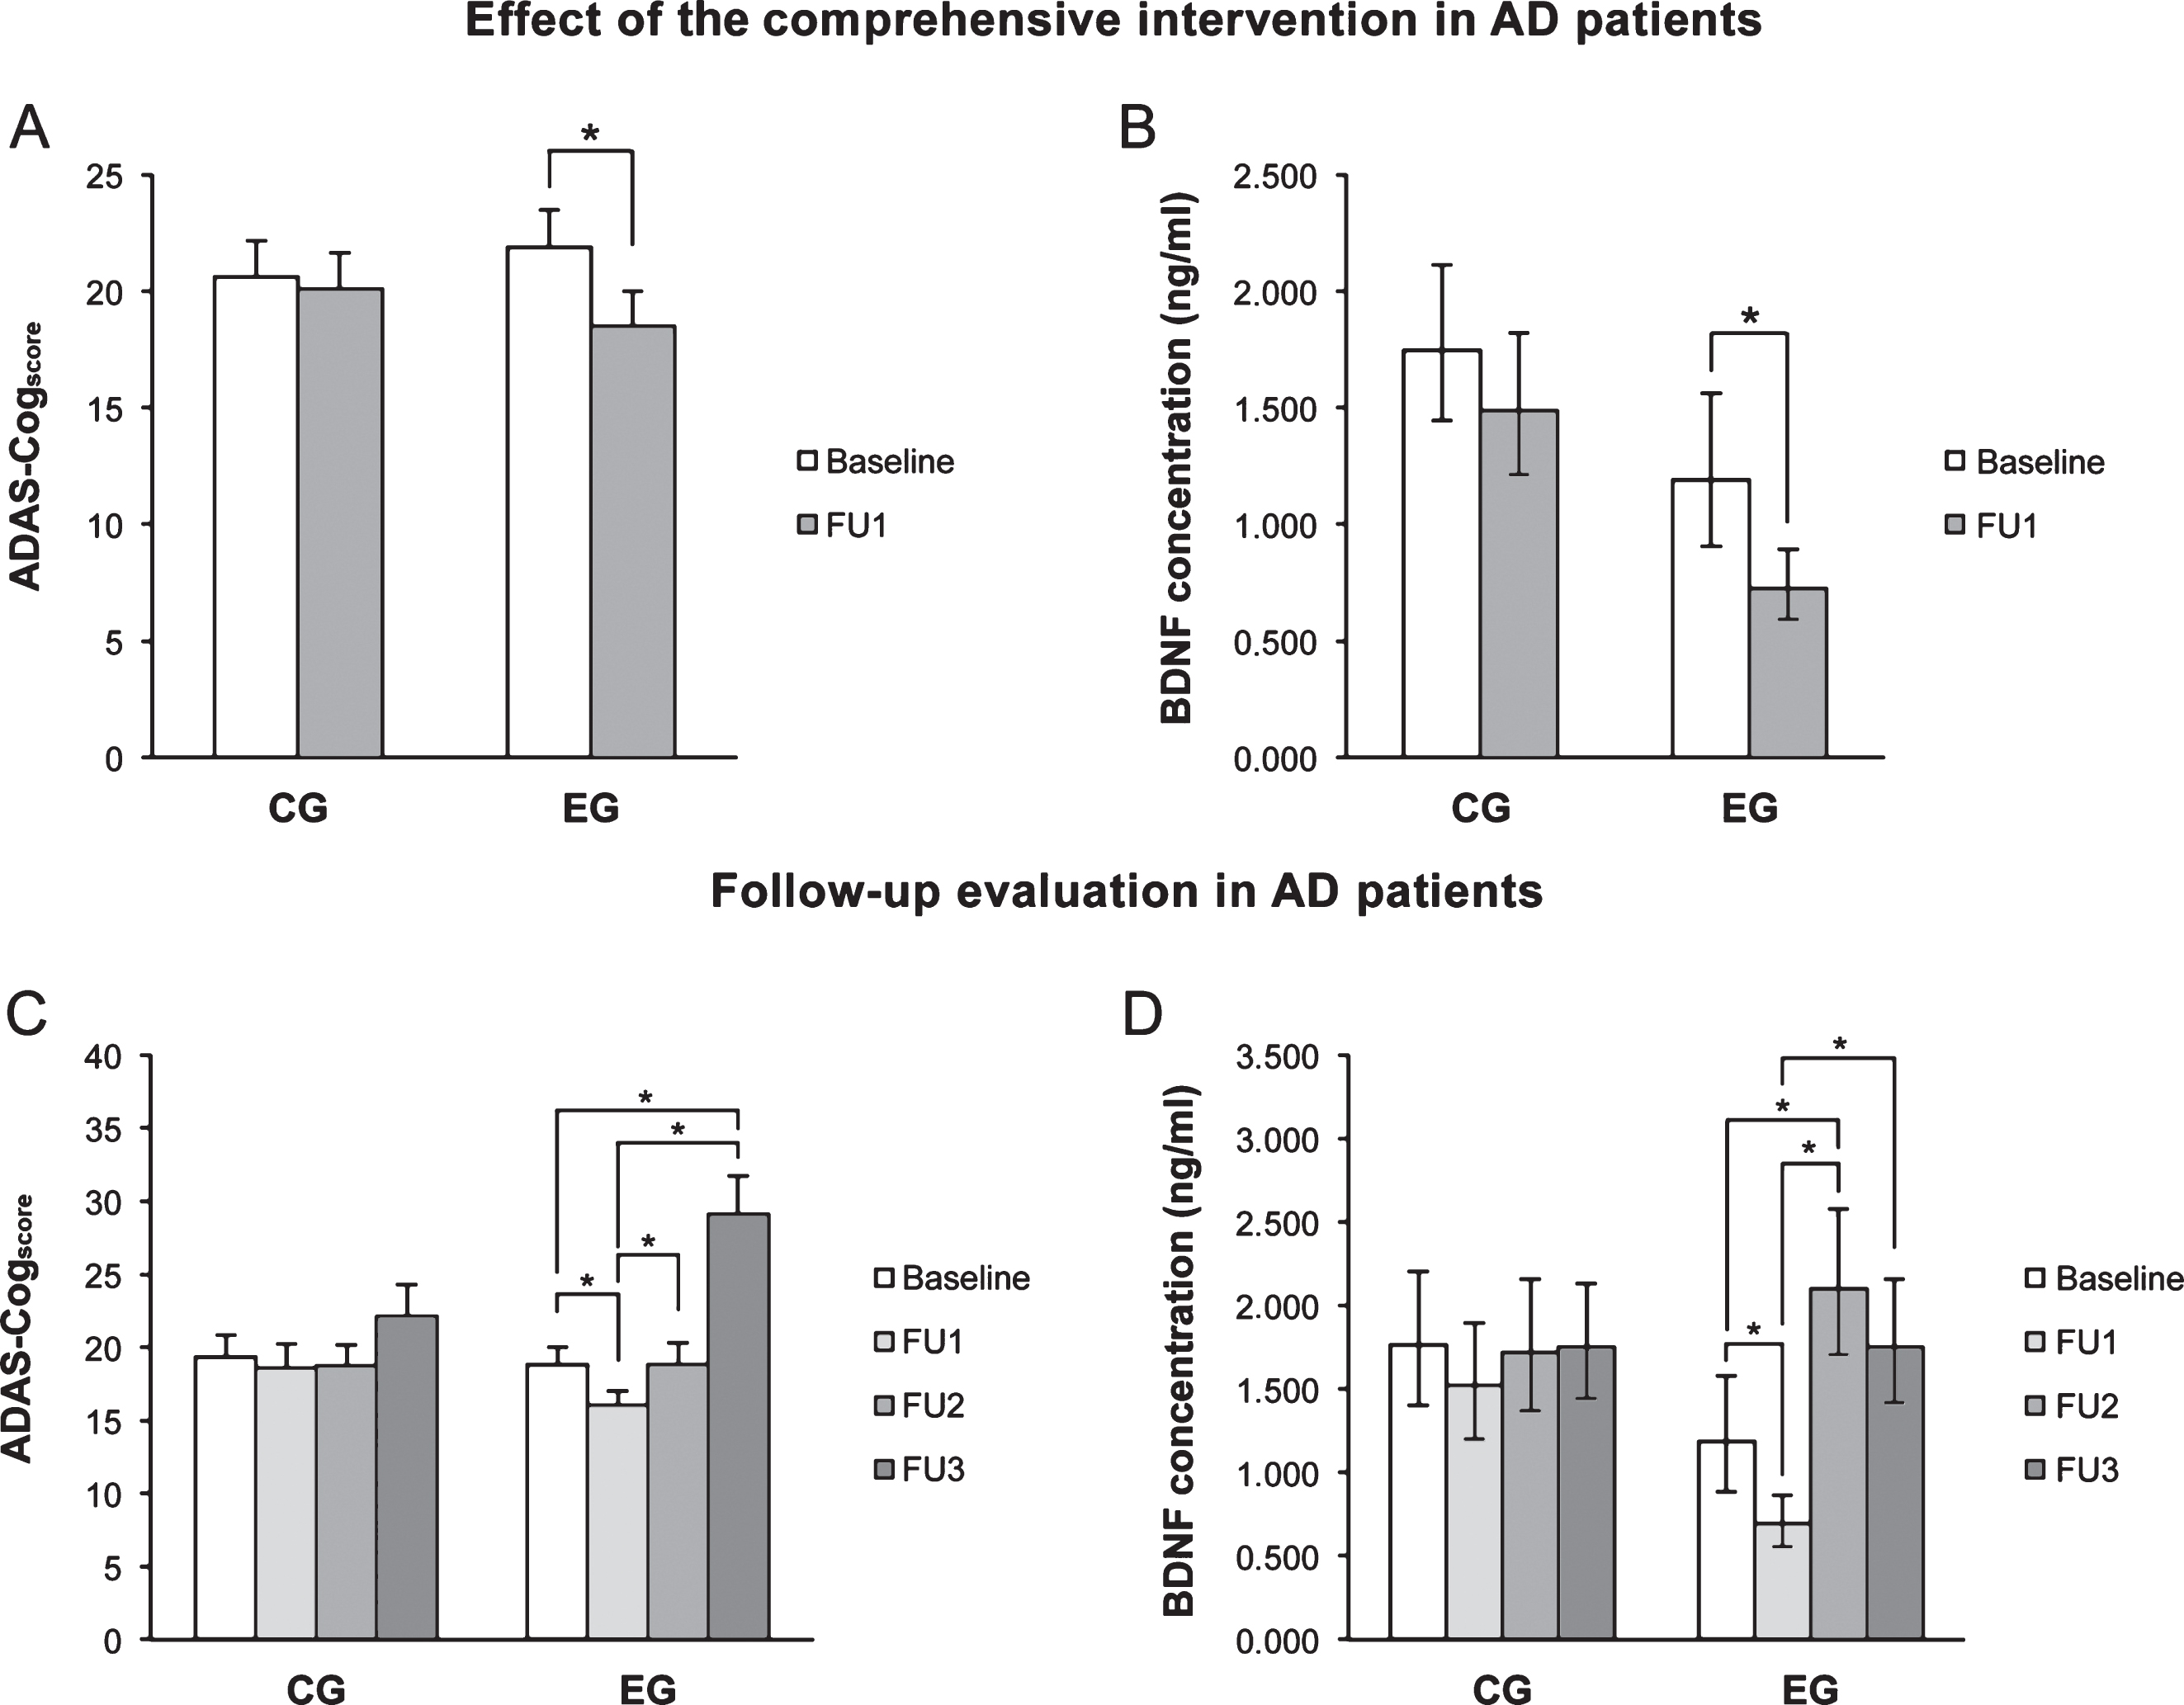 A, B) Immediately after the intervention (FU1), ADAS-Cogscore and pBDNF values fell significantly in the experimental group (EG) but were not significantly changed in control patients (CG). C, D) In EG patients, the ADAS-Cogscore reverted to baseline at 6 months (FU2) and showed a further significant increase at 24 months (FU3) compared to baseline, while pBDNF increased significantly at FU2 compared to FU1 as well as baseline and fell at FU3 versus FU2. In CG patients, ADAS-Cogscore and pBDNF values were virtually unchanged throughout follow-up. In A and C, columns and error bars represent means and standard error of the mean; in B and C, columns and error bars represent back-transformed means and 95% confidence interval. Data were adjusted for age and ADL.